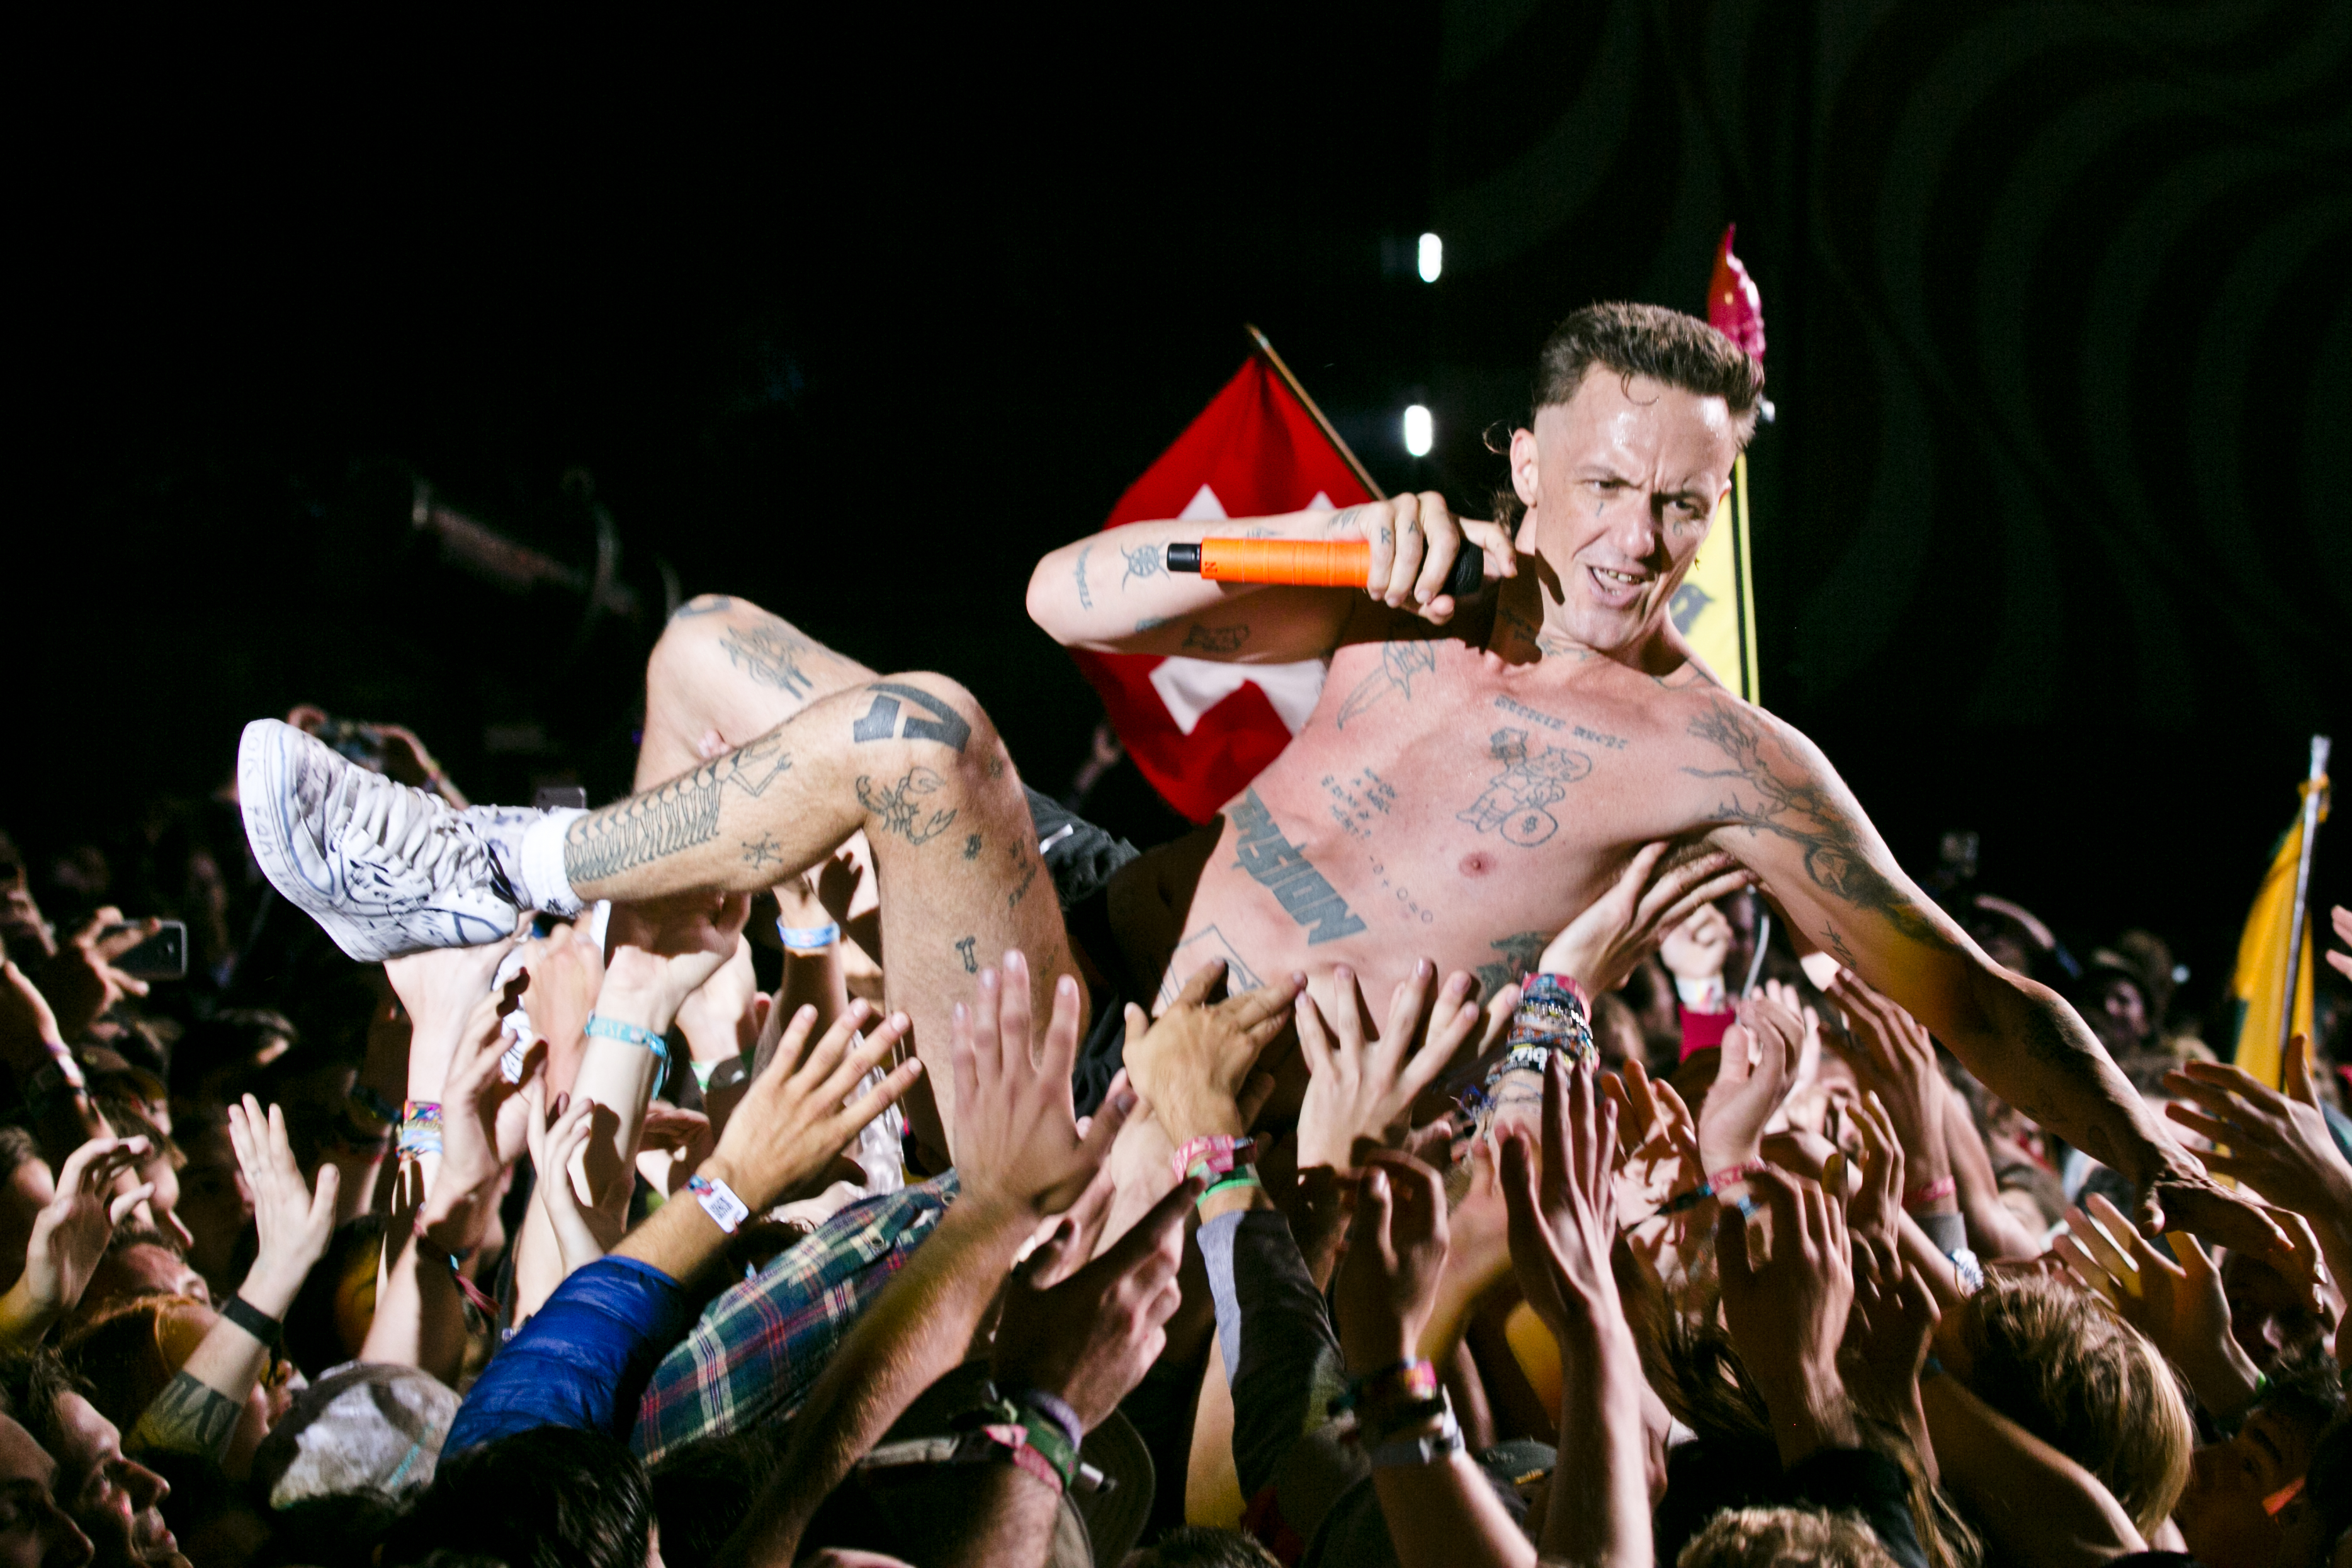 Die Antwoord at Sziget Festival, Budapest, Hungary - 10 August 2016